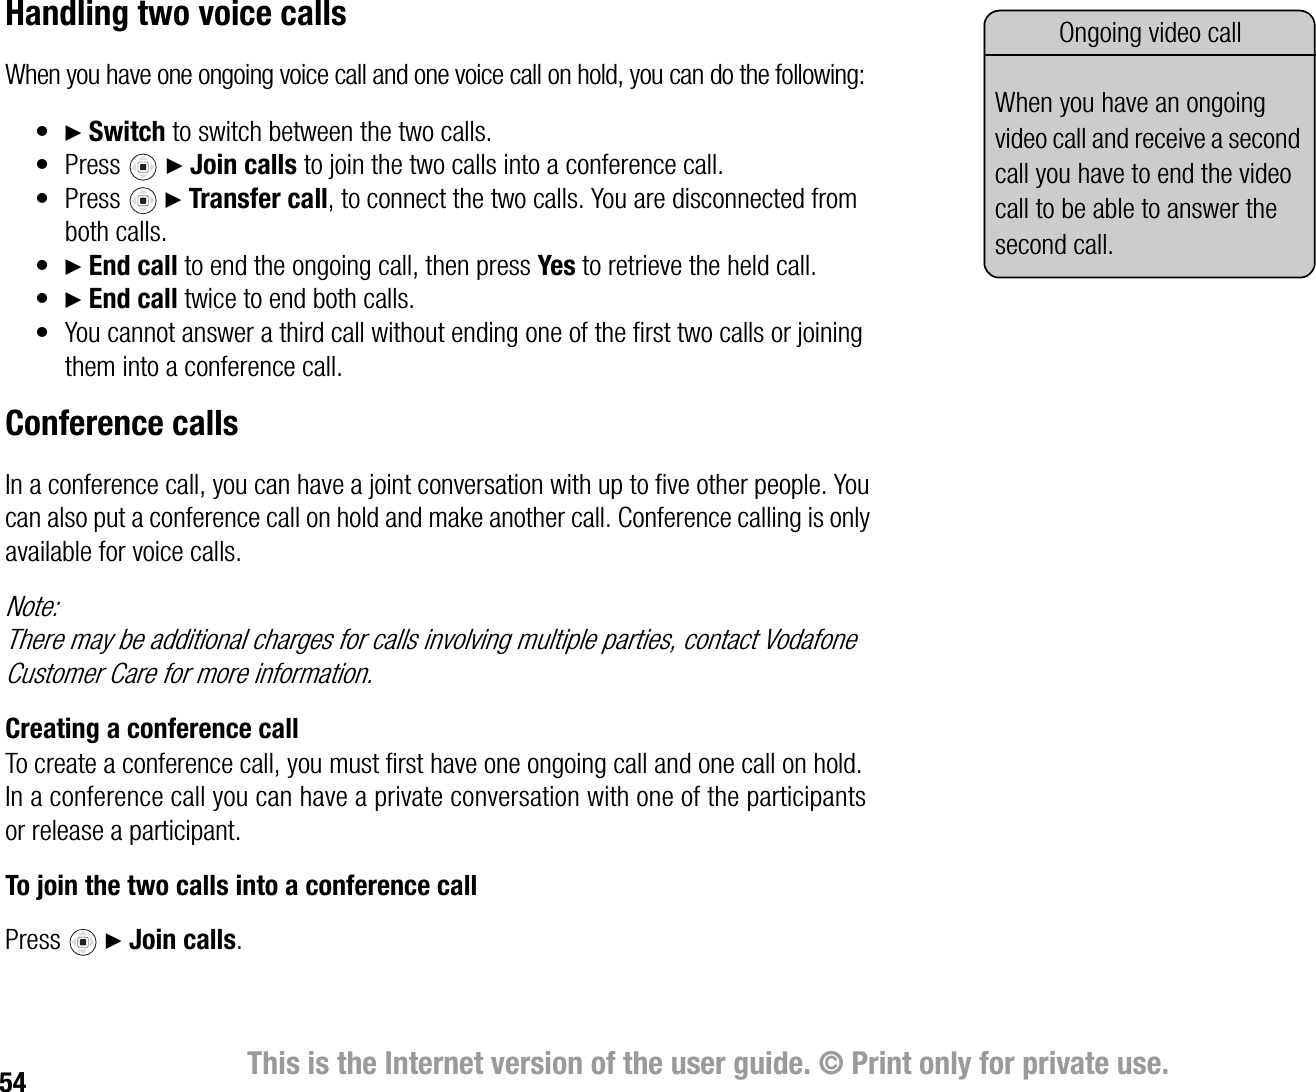 54 This is the Internet version of the user guide. © Print only for private use.Handling two voice callsWhen you have one ongoing voice call and one voice call on hold, you can do the following:•} Switch to switch between the two calls.•Press} Join calls to join the two calls into a conference call.•Press } Transfer call, to connect the two calls. You are disconnected from both calls.•} End call to end the ongoing call, then press Yes to retrieve the held call.•} End call twice to end both calls.• You cannot answer a third call without ending one of the first two calls or joining them into a conference call.Conference callsIn a conference call, you can have a joint conversation with up to five other people. You can also put a conference call on hold and make another call. Conference calling is only available for voice calls.Note:There may be additional charges for calls involving multiple parties, contact Vodafone Customer Care for more information.Creating a conference callTo create a conference call, you must first have one ongoing call and one call on hold. In a conference call you can have a private conversation with one of the participants or release a participant.To join the two calls into a conference callPress } Join calls.Ongoing video callWhen you have an ongoing video call and receive a second call you have to end the video call to be able to answer the second call.